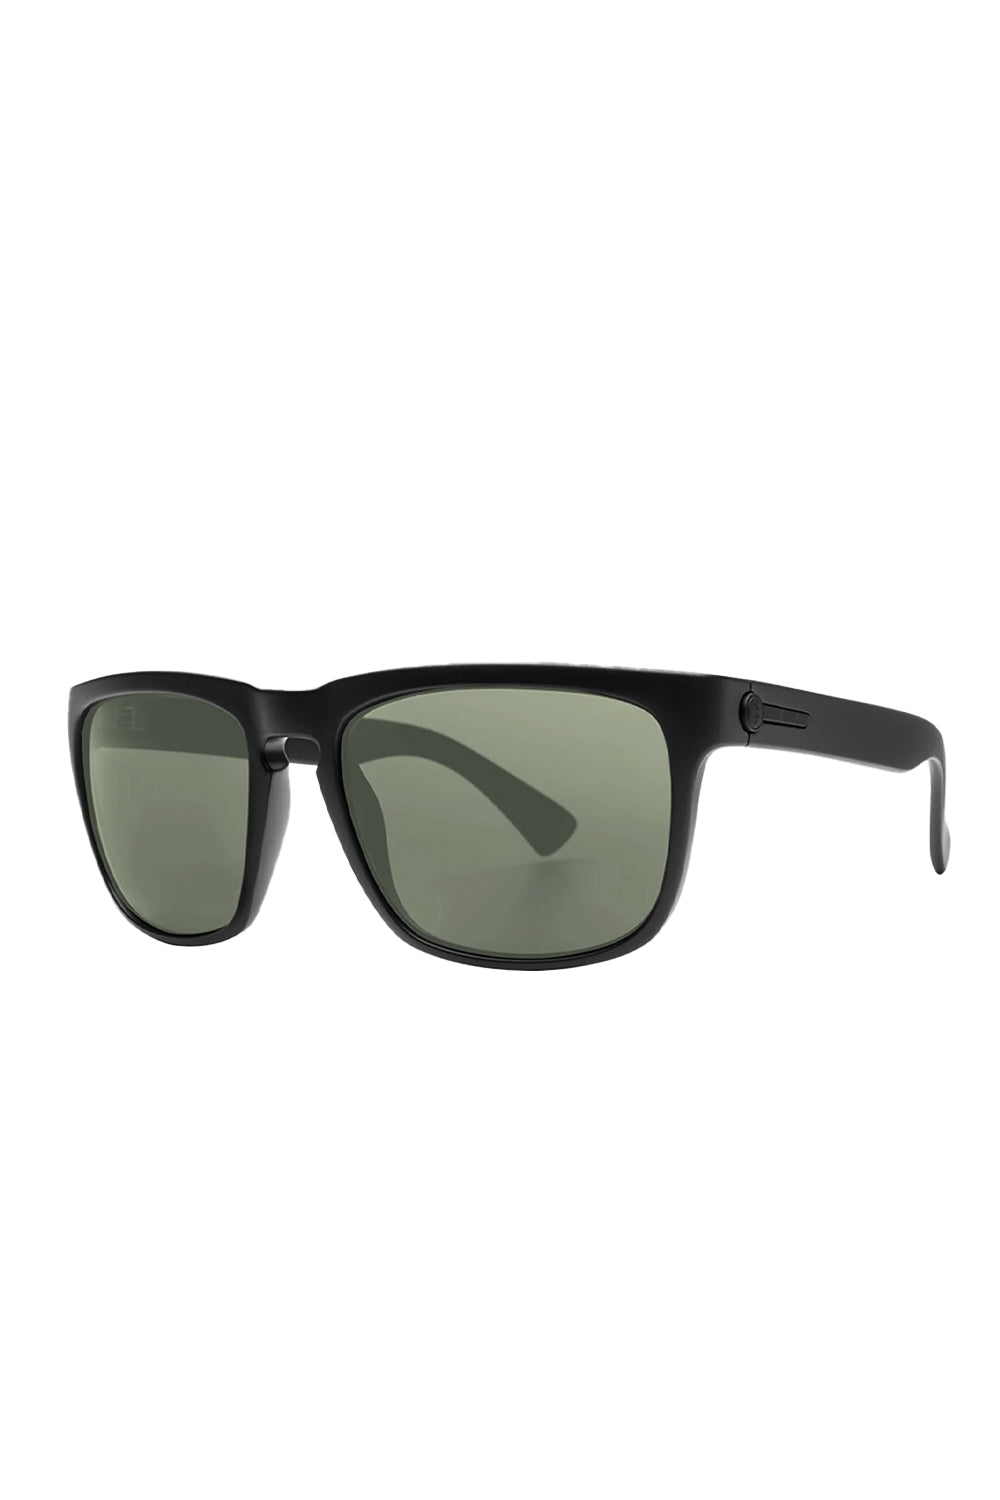 Electric Knoxville Sunglasses